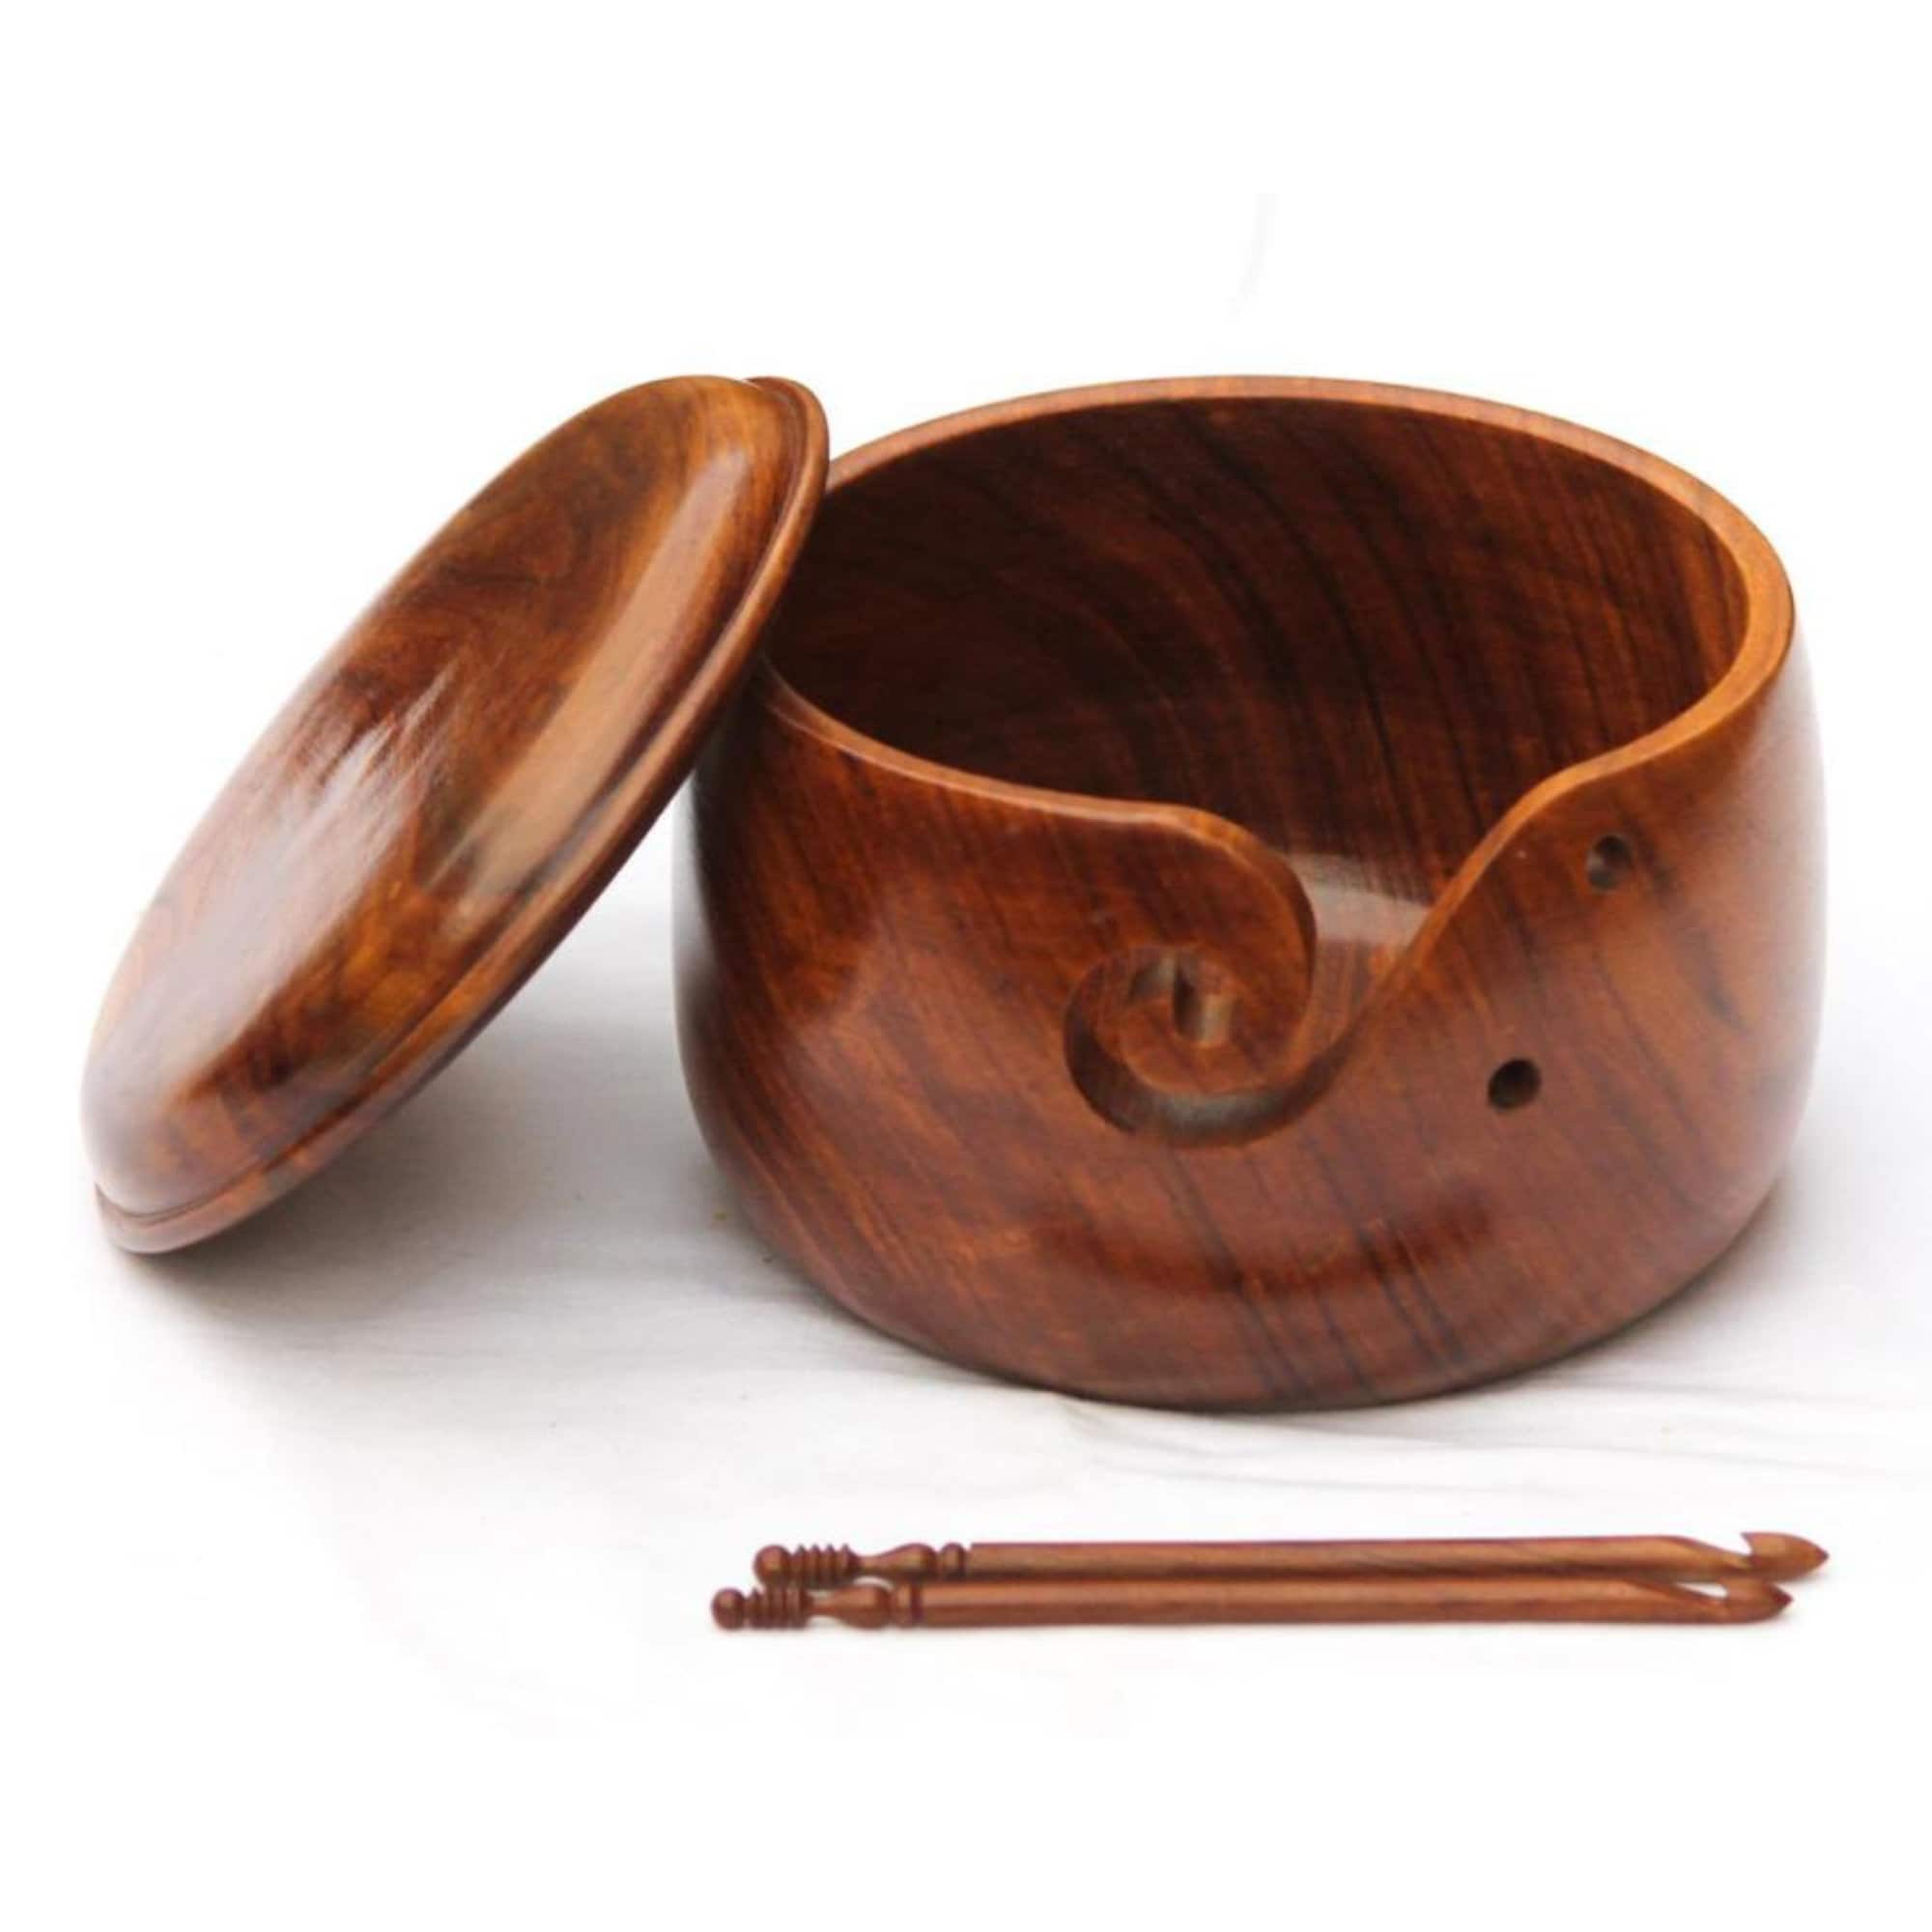 Yarn Bowl, Wooden Box With Button Lid, Wooden Button Box, Sewing Box, Craft  Box, Knickknack Bowl Etc Hand Turned From Various Woods. 